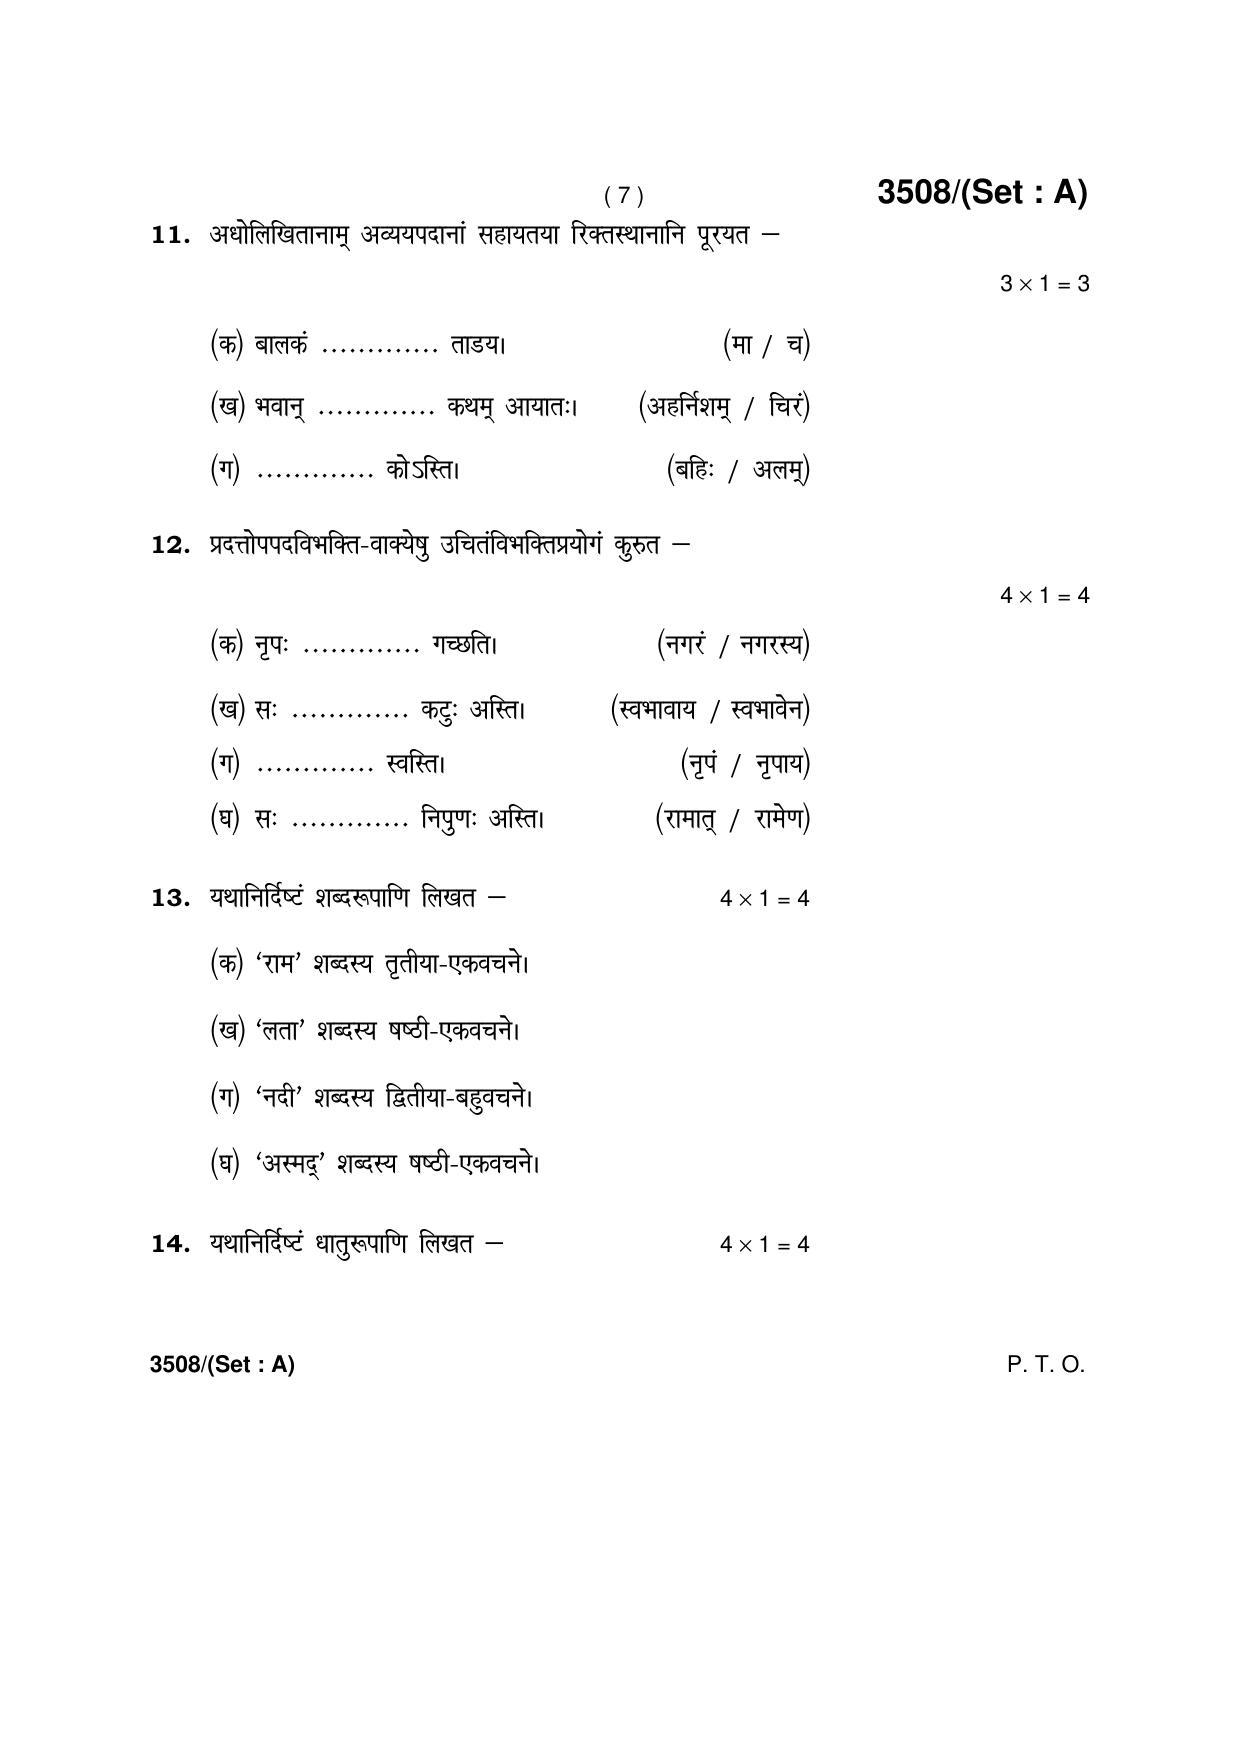 Haryana Board HBSE Class 10 Sanskrit -A 2018 Question Paper - Page 7